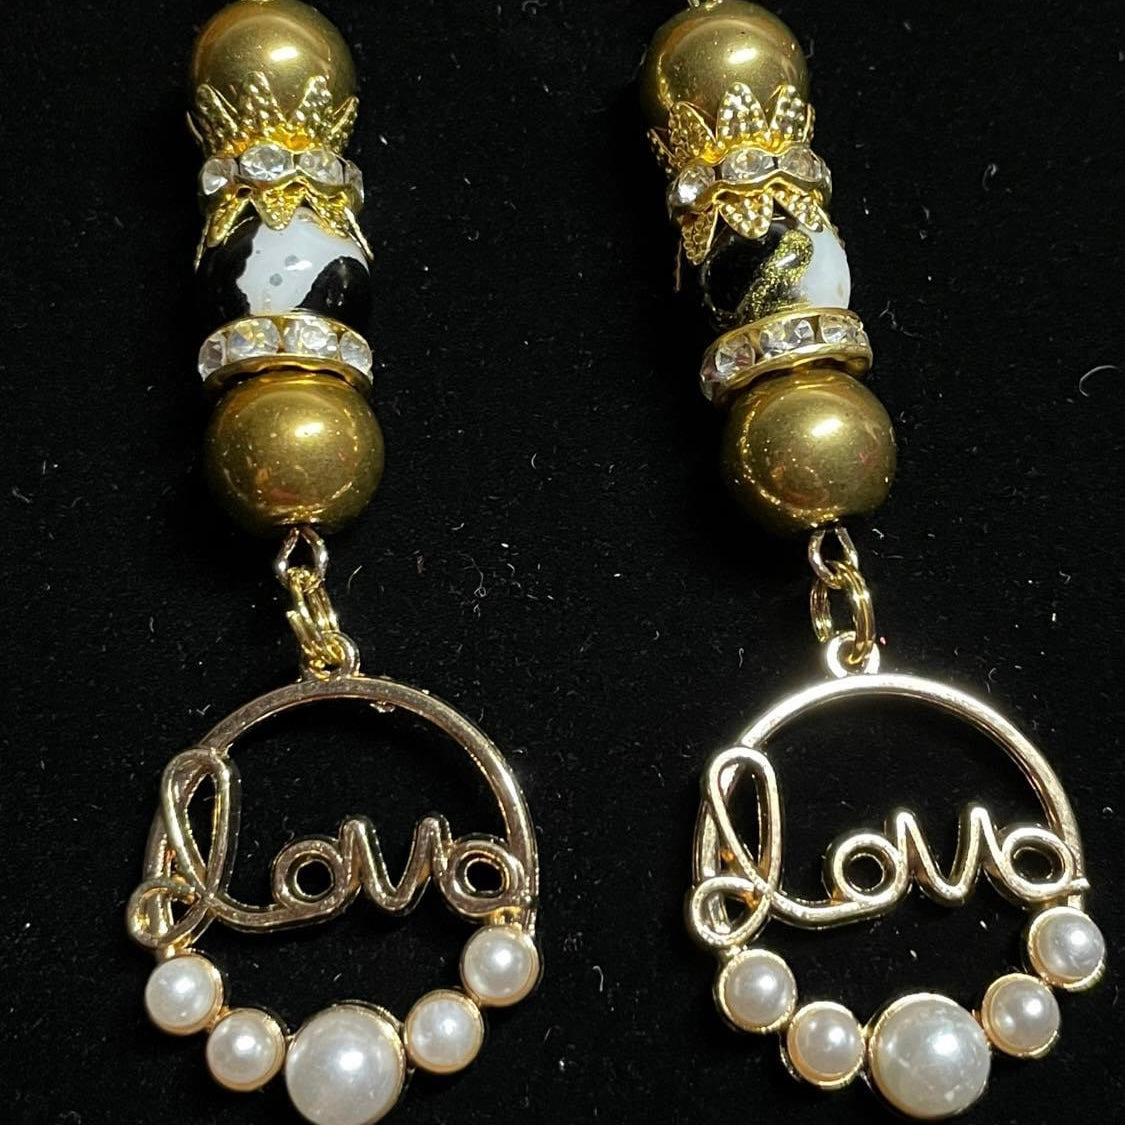 Pearled with love earrings